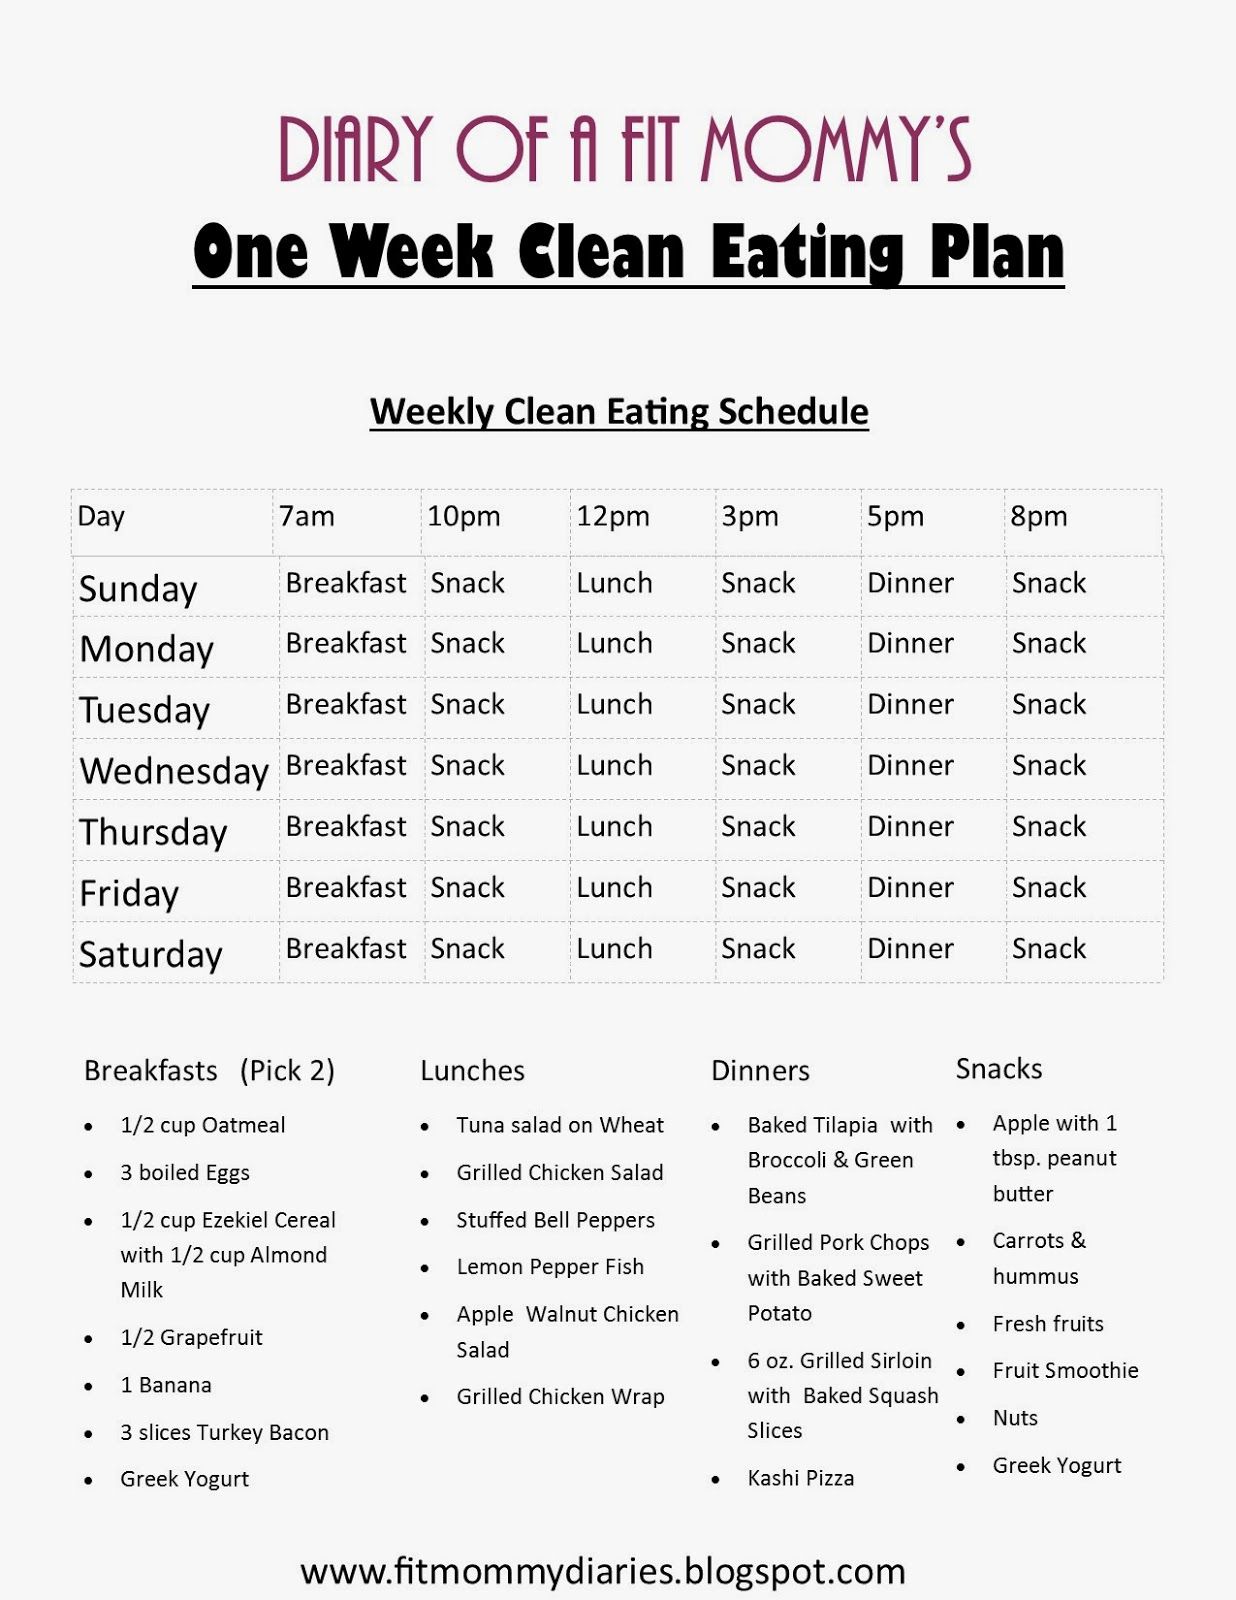 sharny and julius meal plan example